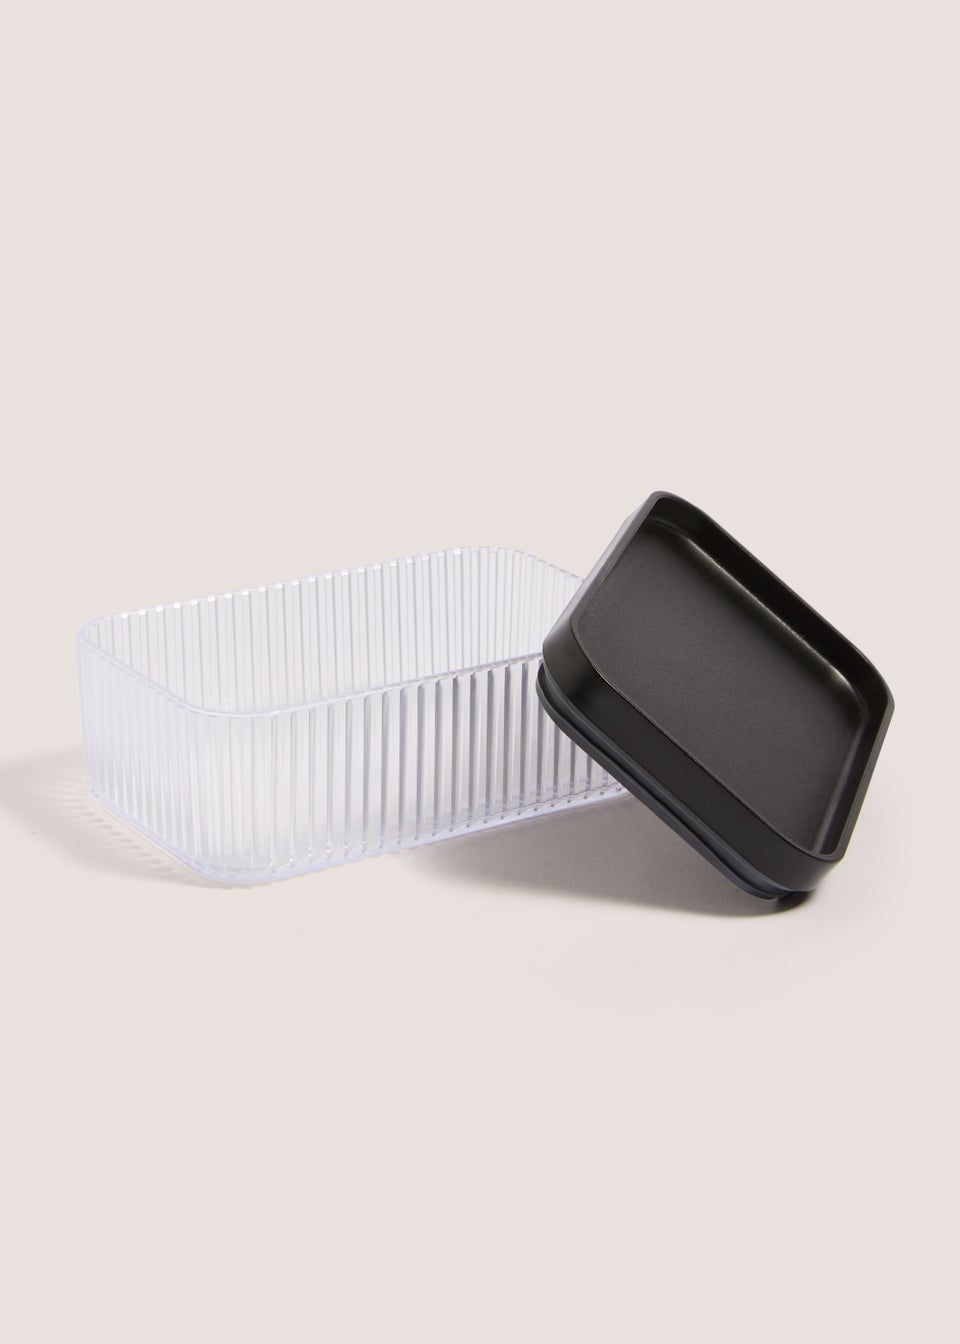 Clear Ribbed Food Storage with Black Lid (6cm x 14cm)